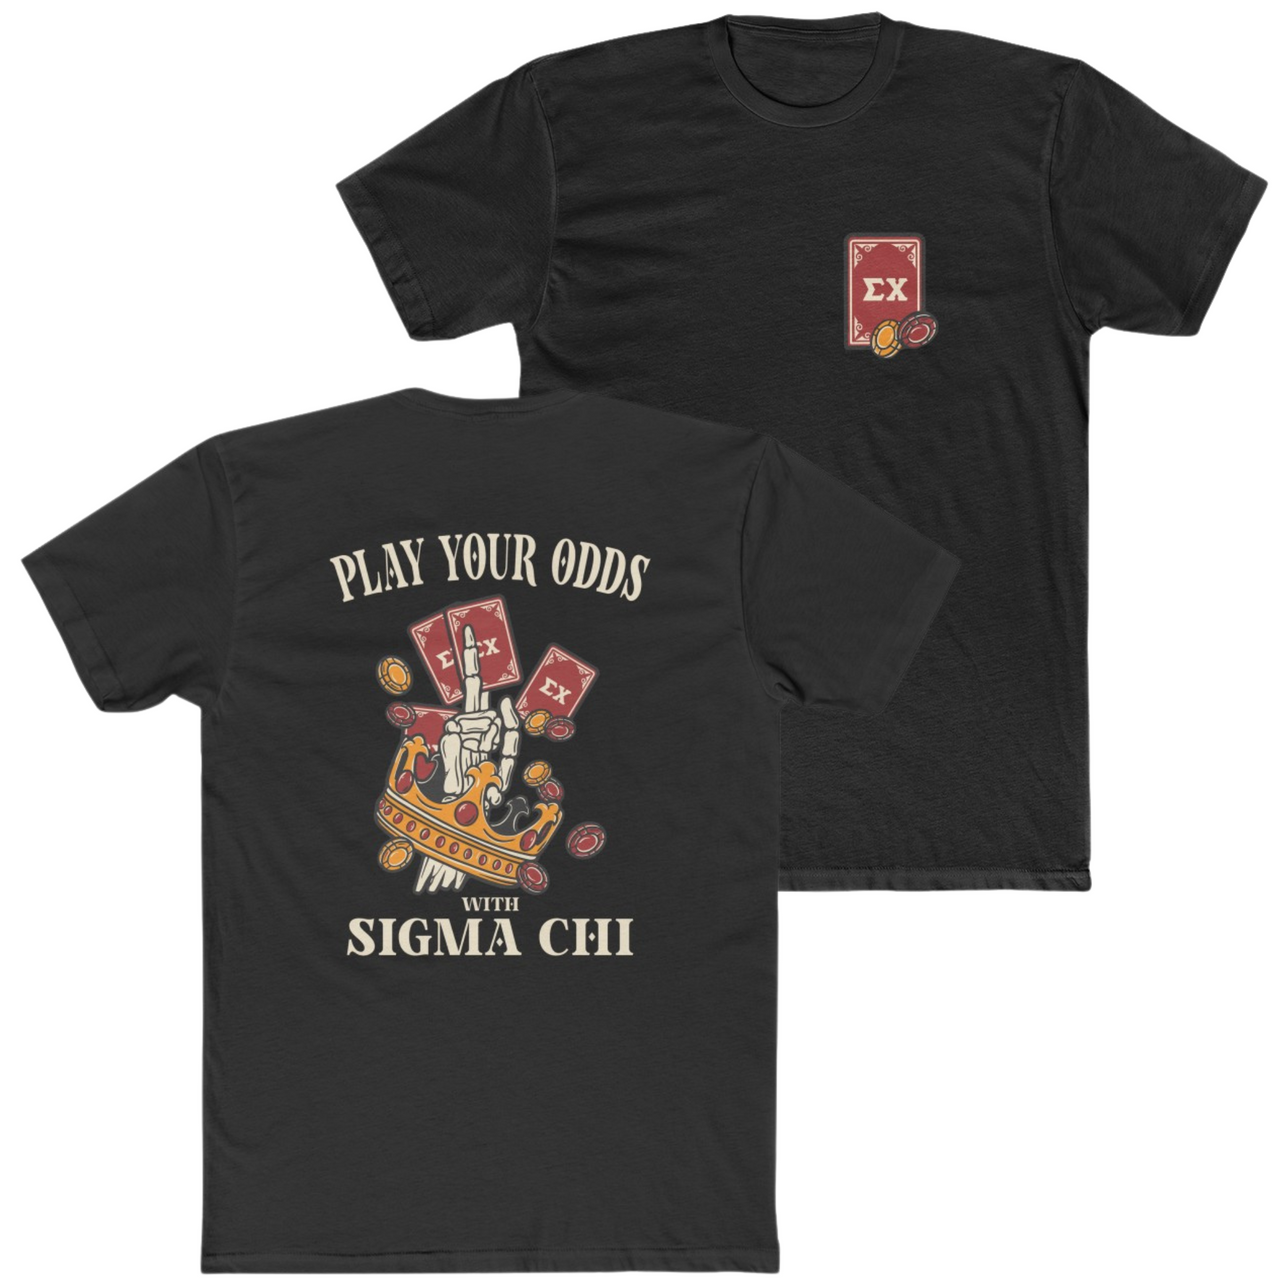 Black Sigma Chi Graphic T-Shirt | Play Your Odds | Sigma Chi Fraternity Merch House